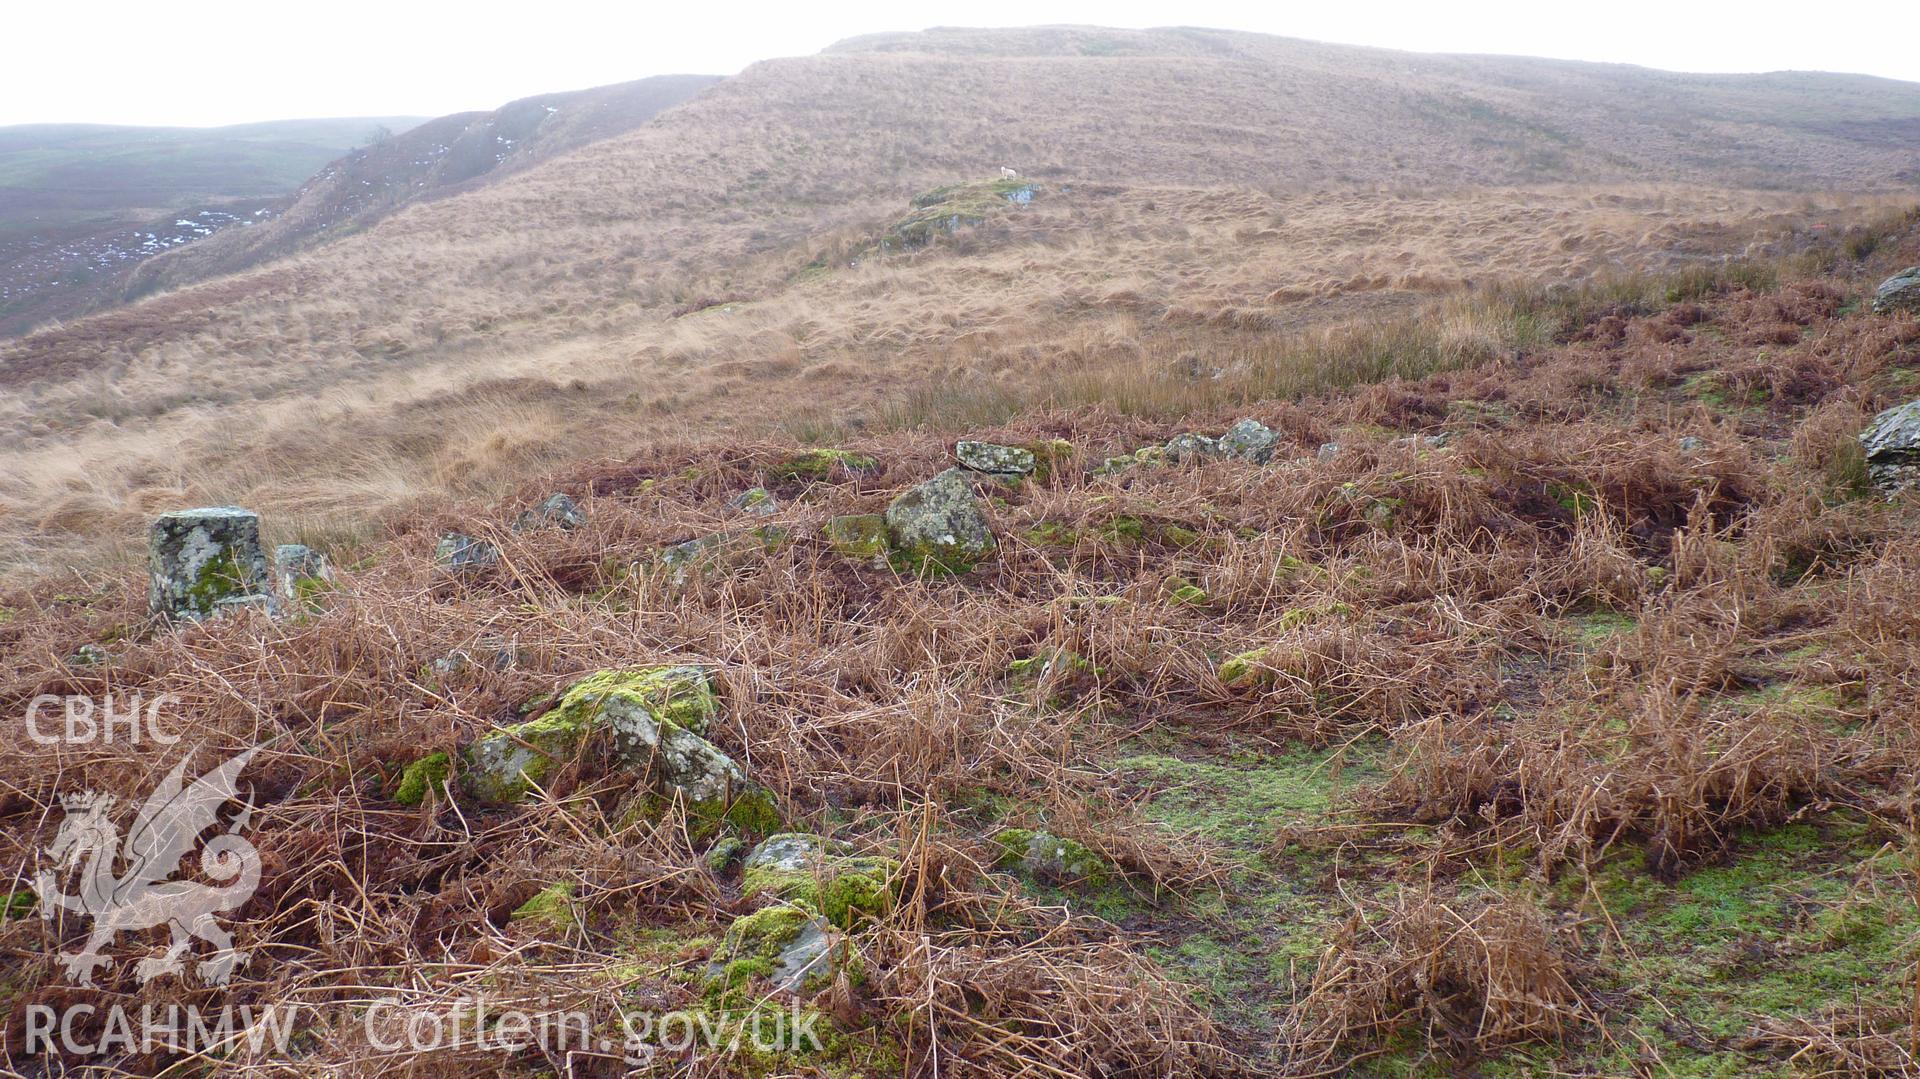 Remains of Cerrig Llwydion deserted rural settlement. Looking south west. Photographed for Archaeological Desk Based Assessment of Afon Claerwen, Elan Valley, Rhayader. Assessment conducted by Archaeology Wales in 2017-18. Project no. 2573.